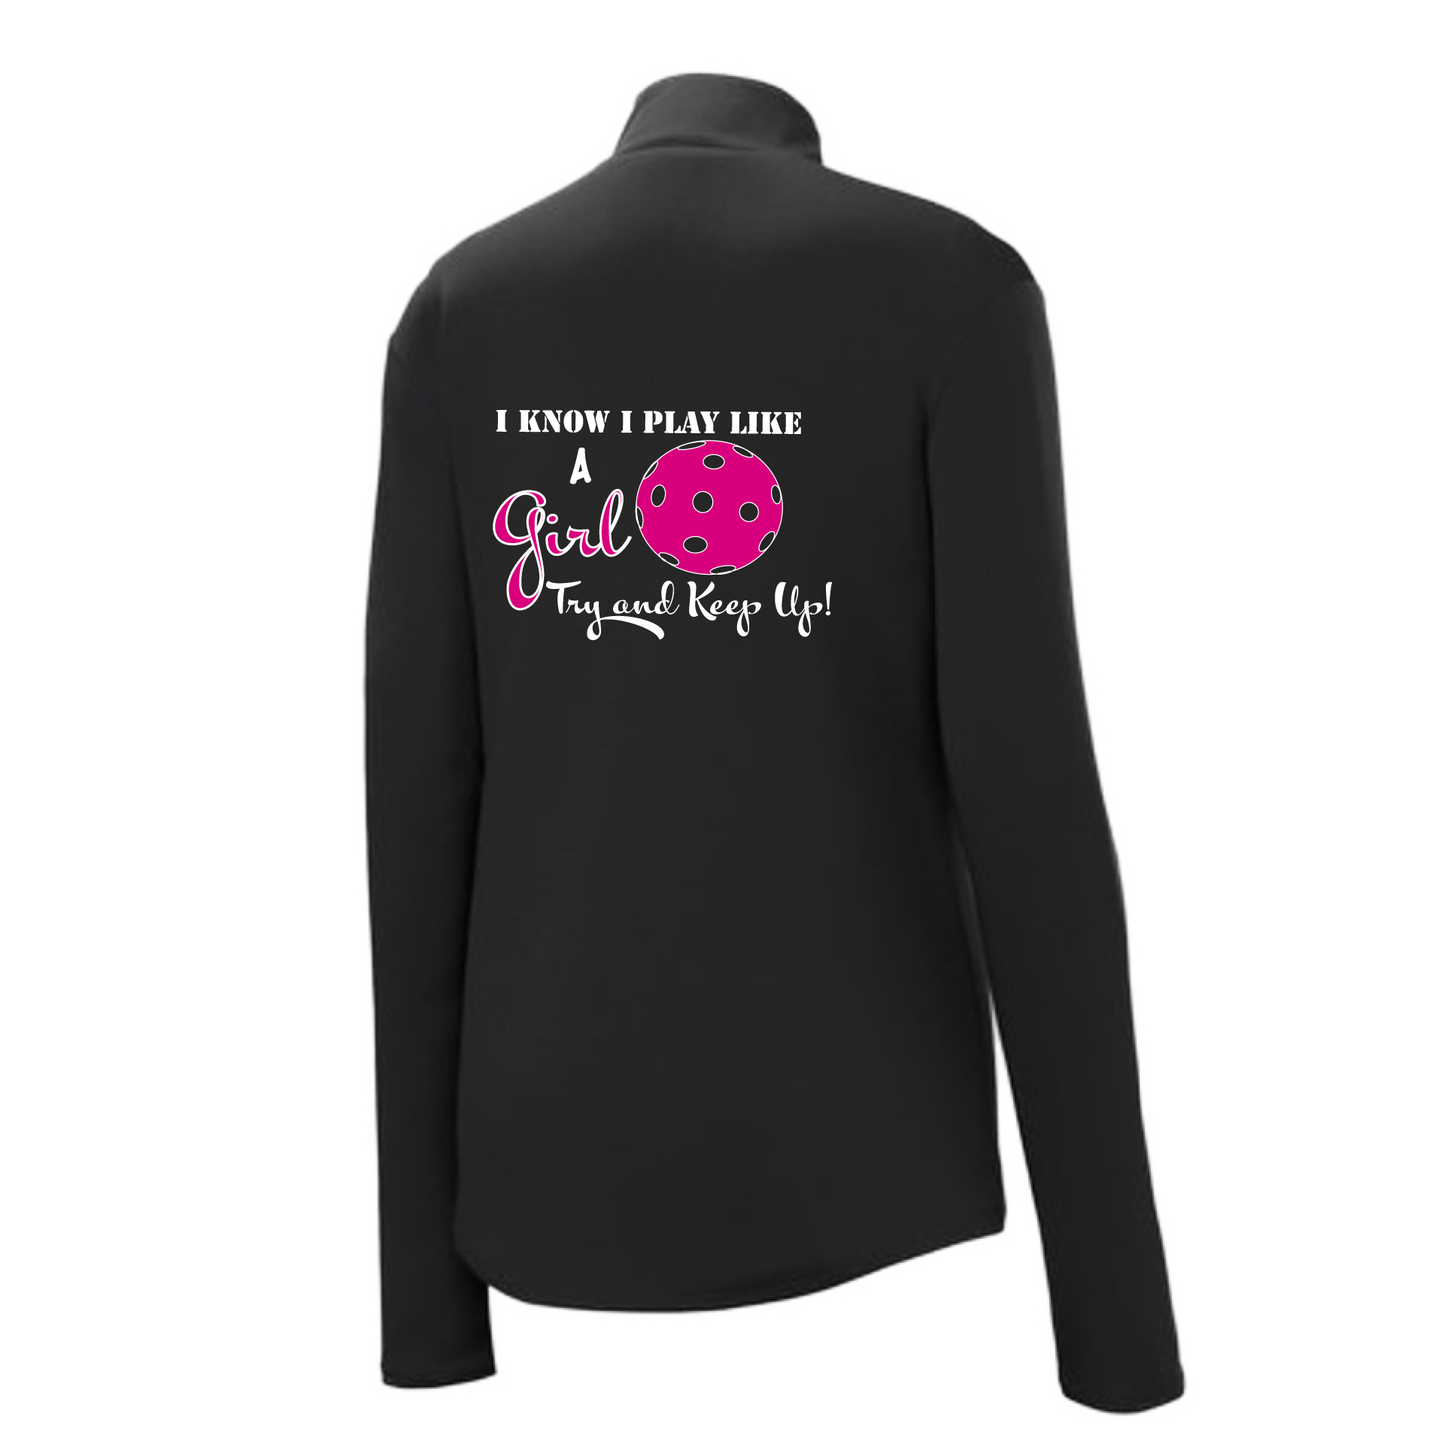 Pickleball Design:I know I Play Like a Girl, Try to Keep Up  Women's 1/4-Zip Pullover: Princess seams and drop tail hem.  Turn up the volume in this Women's shirt with its perfect mix of softness and attitude. Material is ultra-comfortable with moisture wicking properties and tri-blend softness. PosiCharge technology locks in color. Highly breathable and lightweight. Versatile enough for wearing year-round.